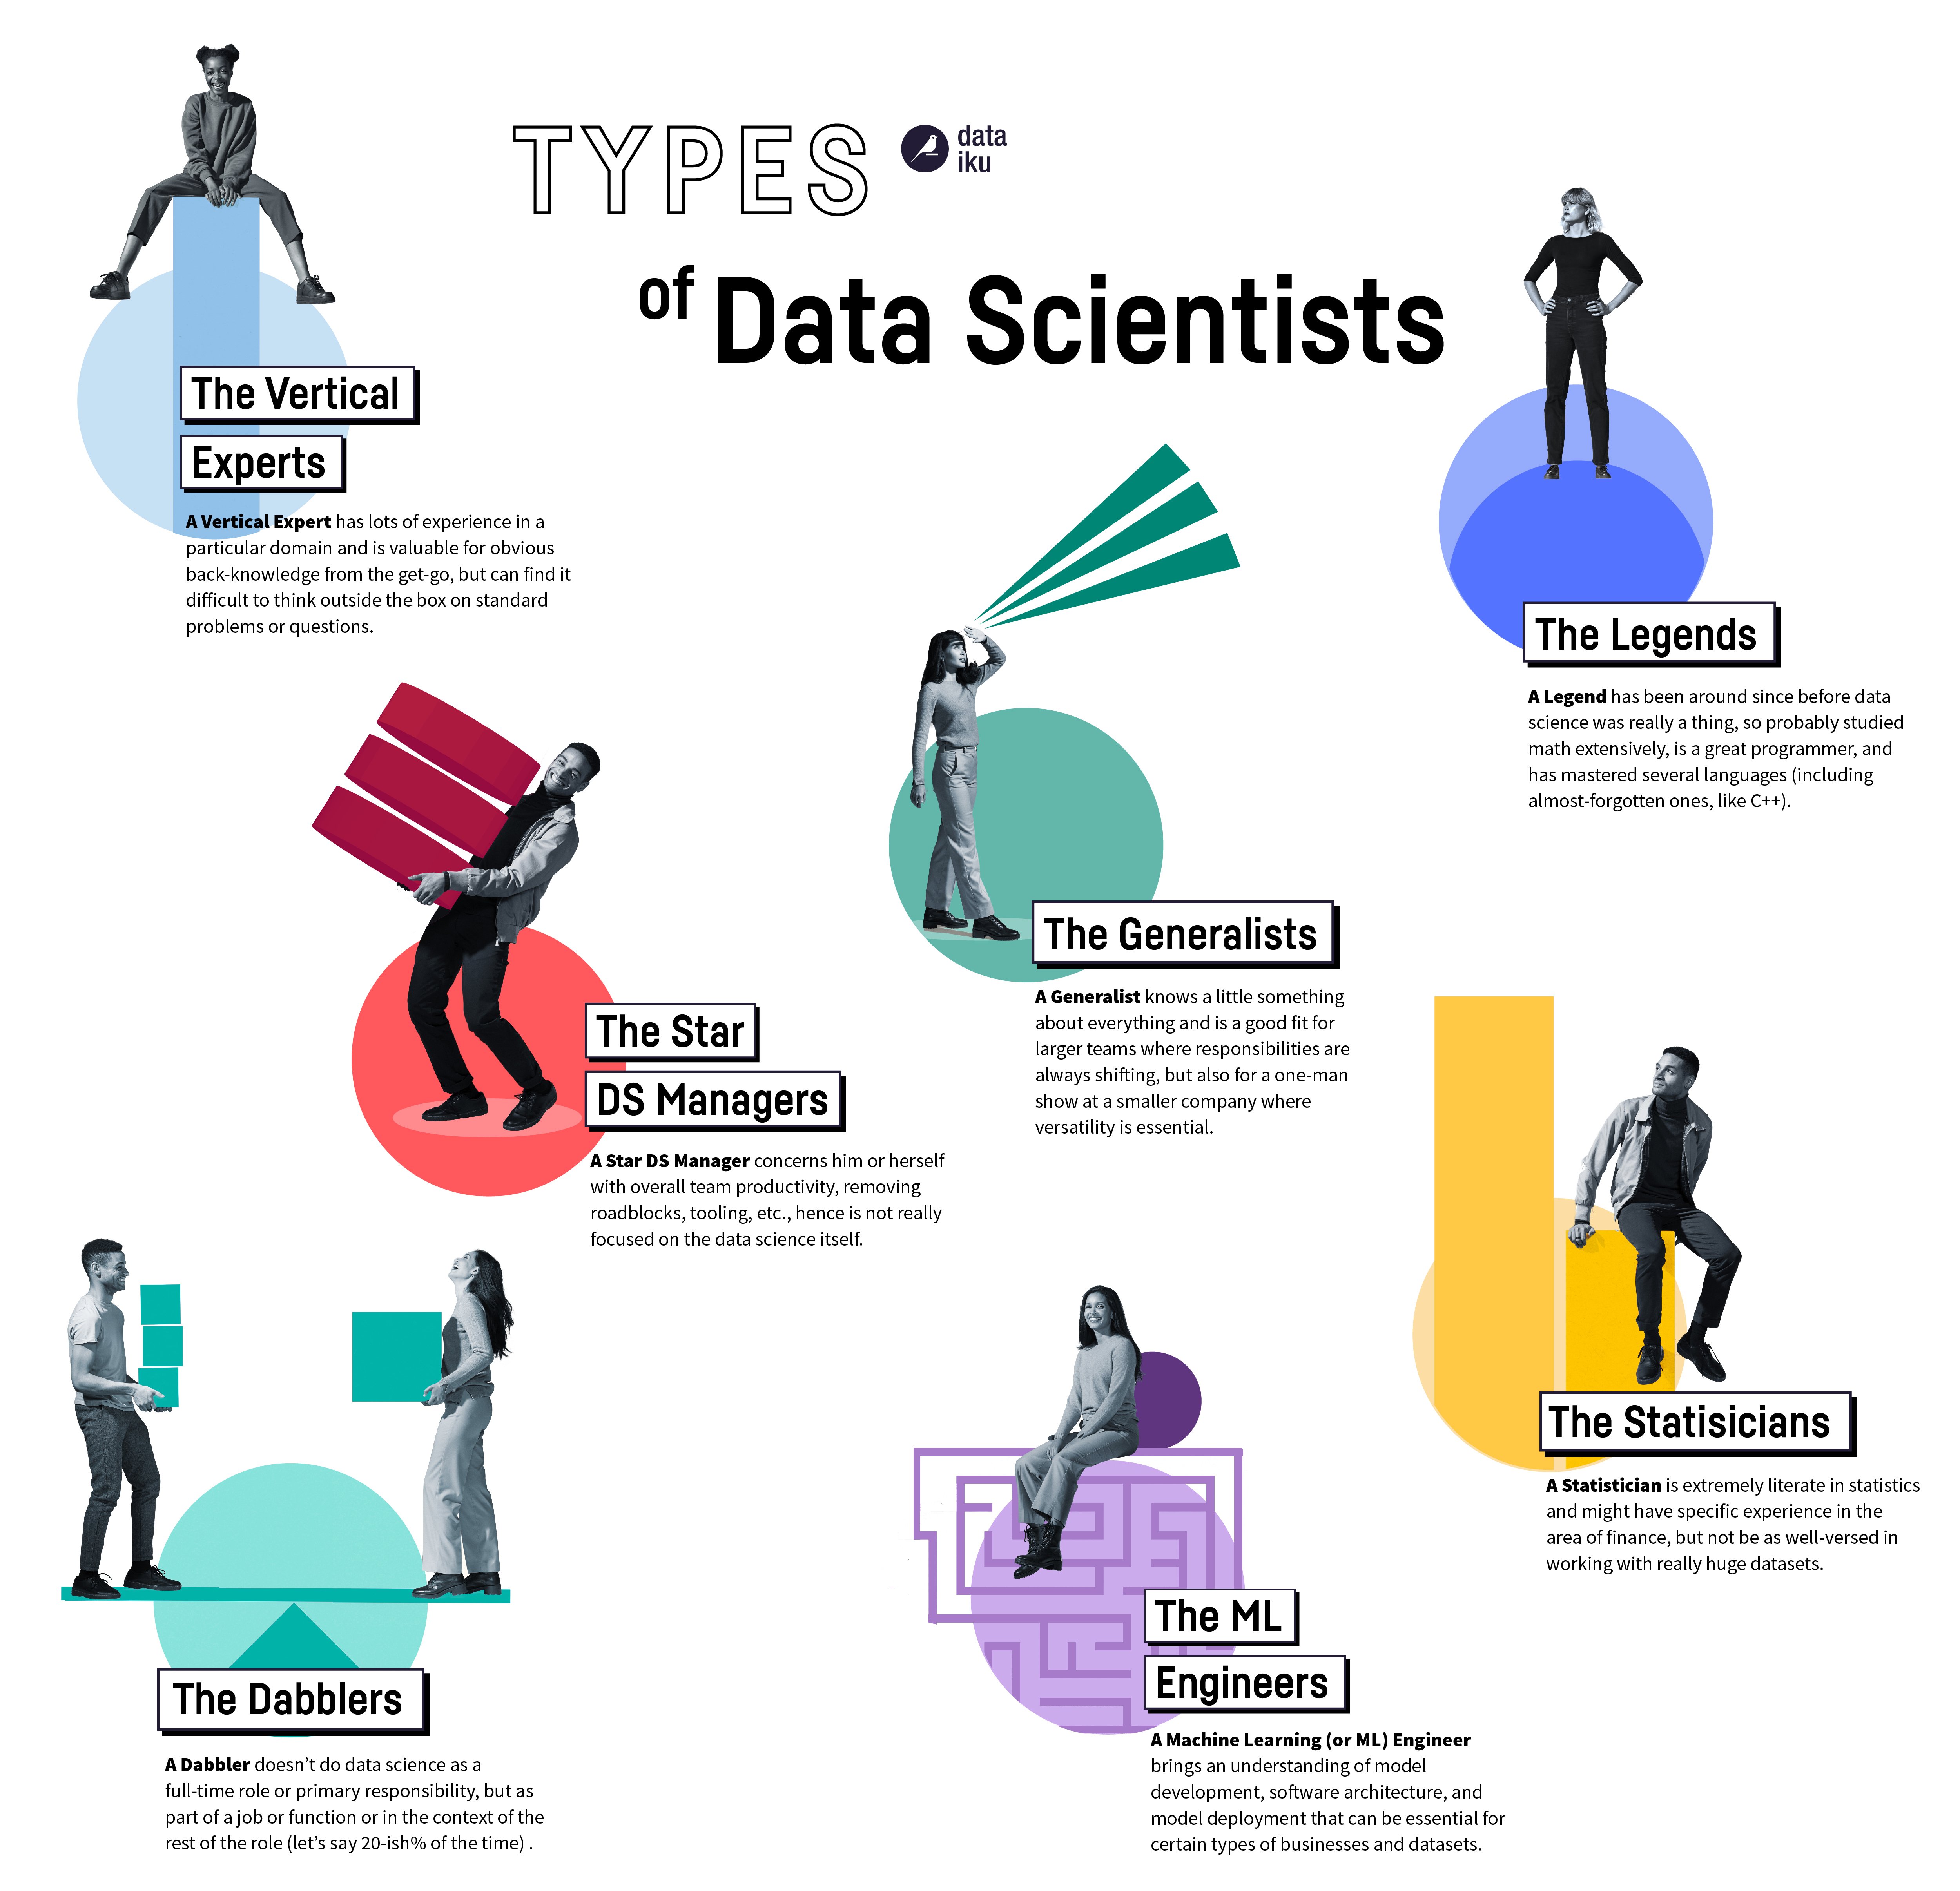 research work in data science